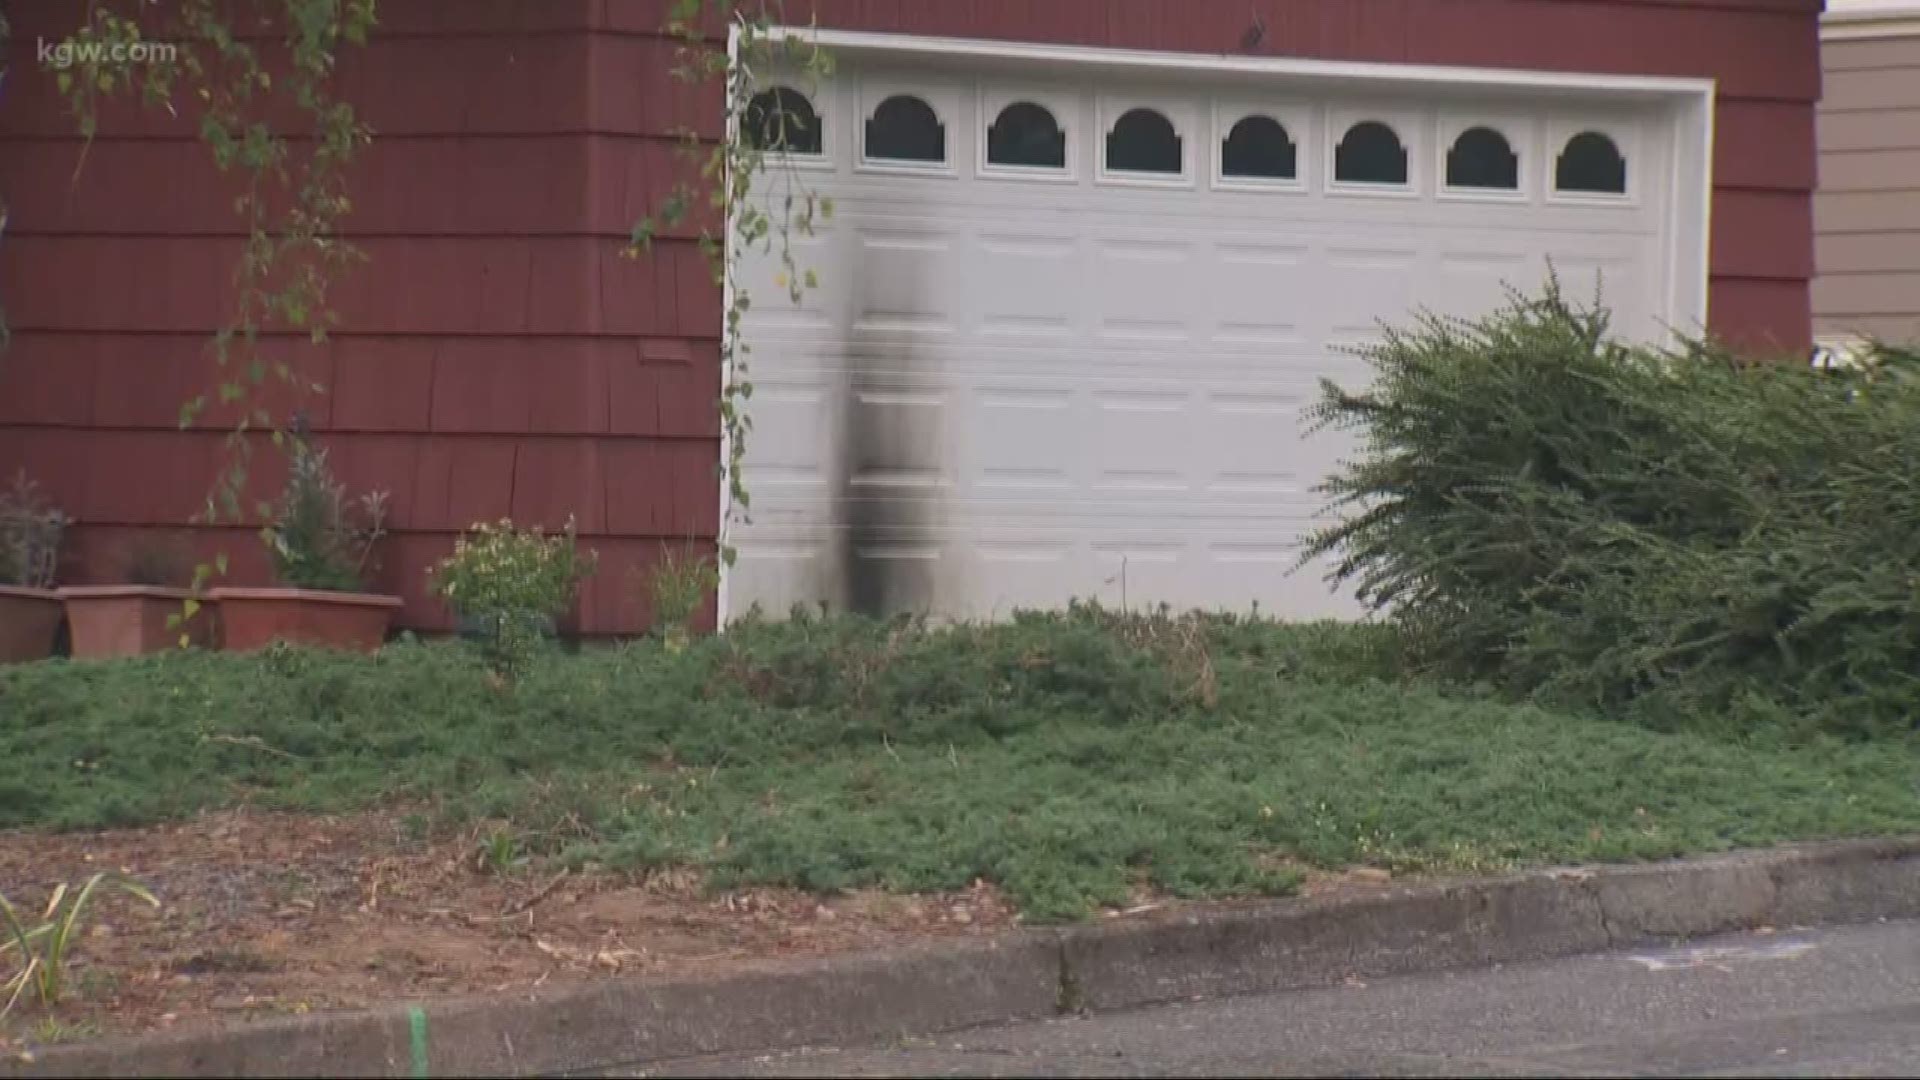 Gresham home hit with Molotov cocktail